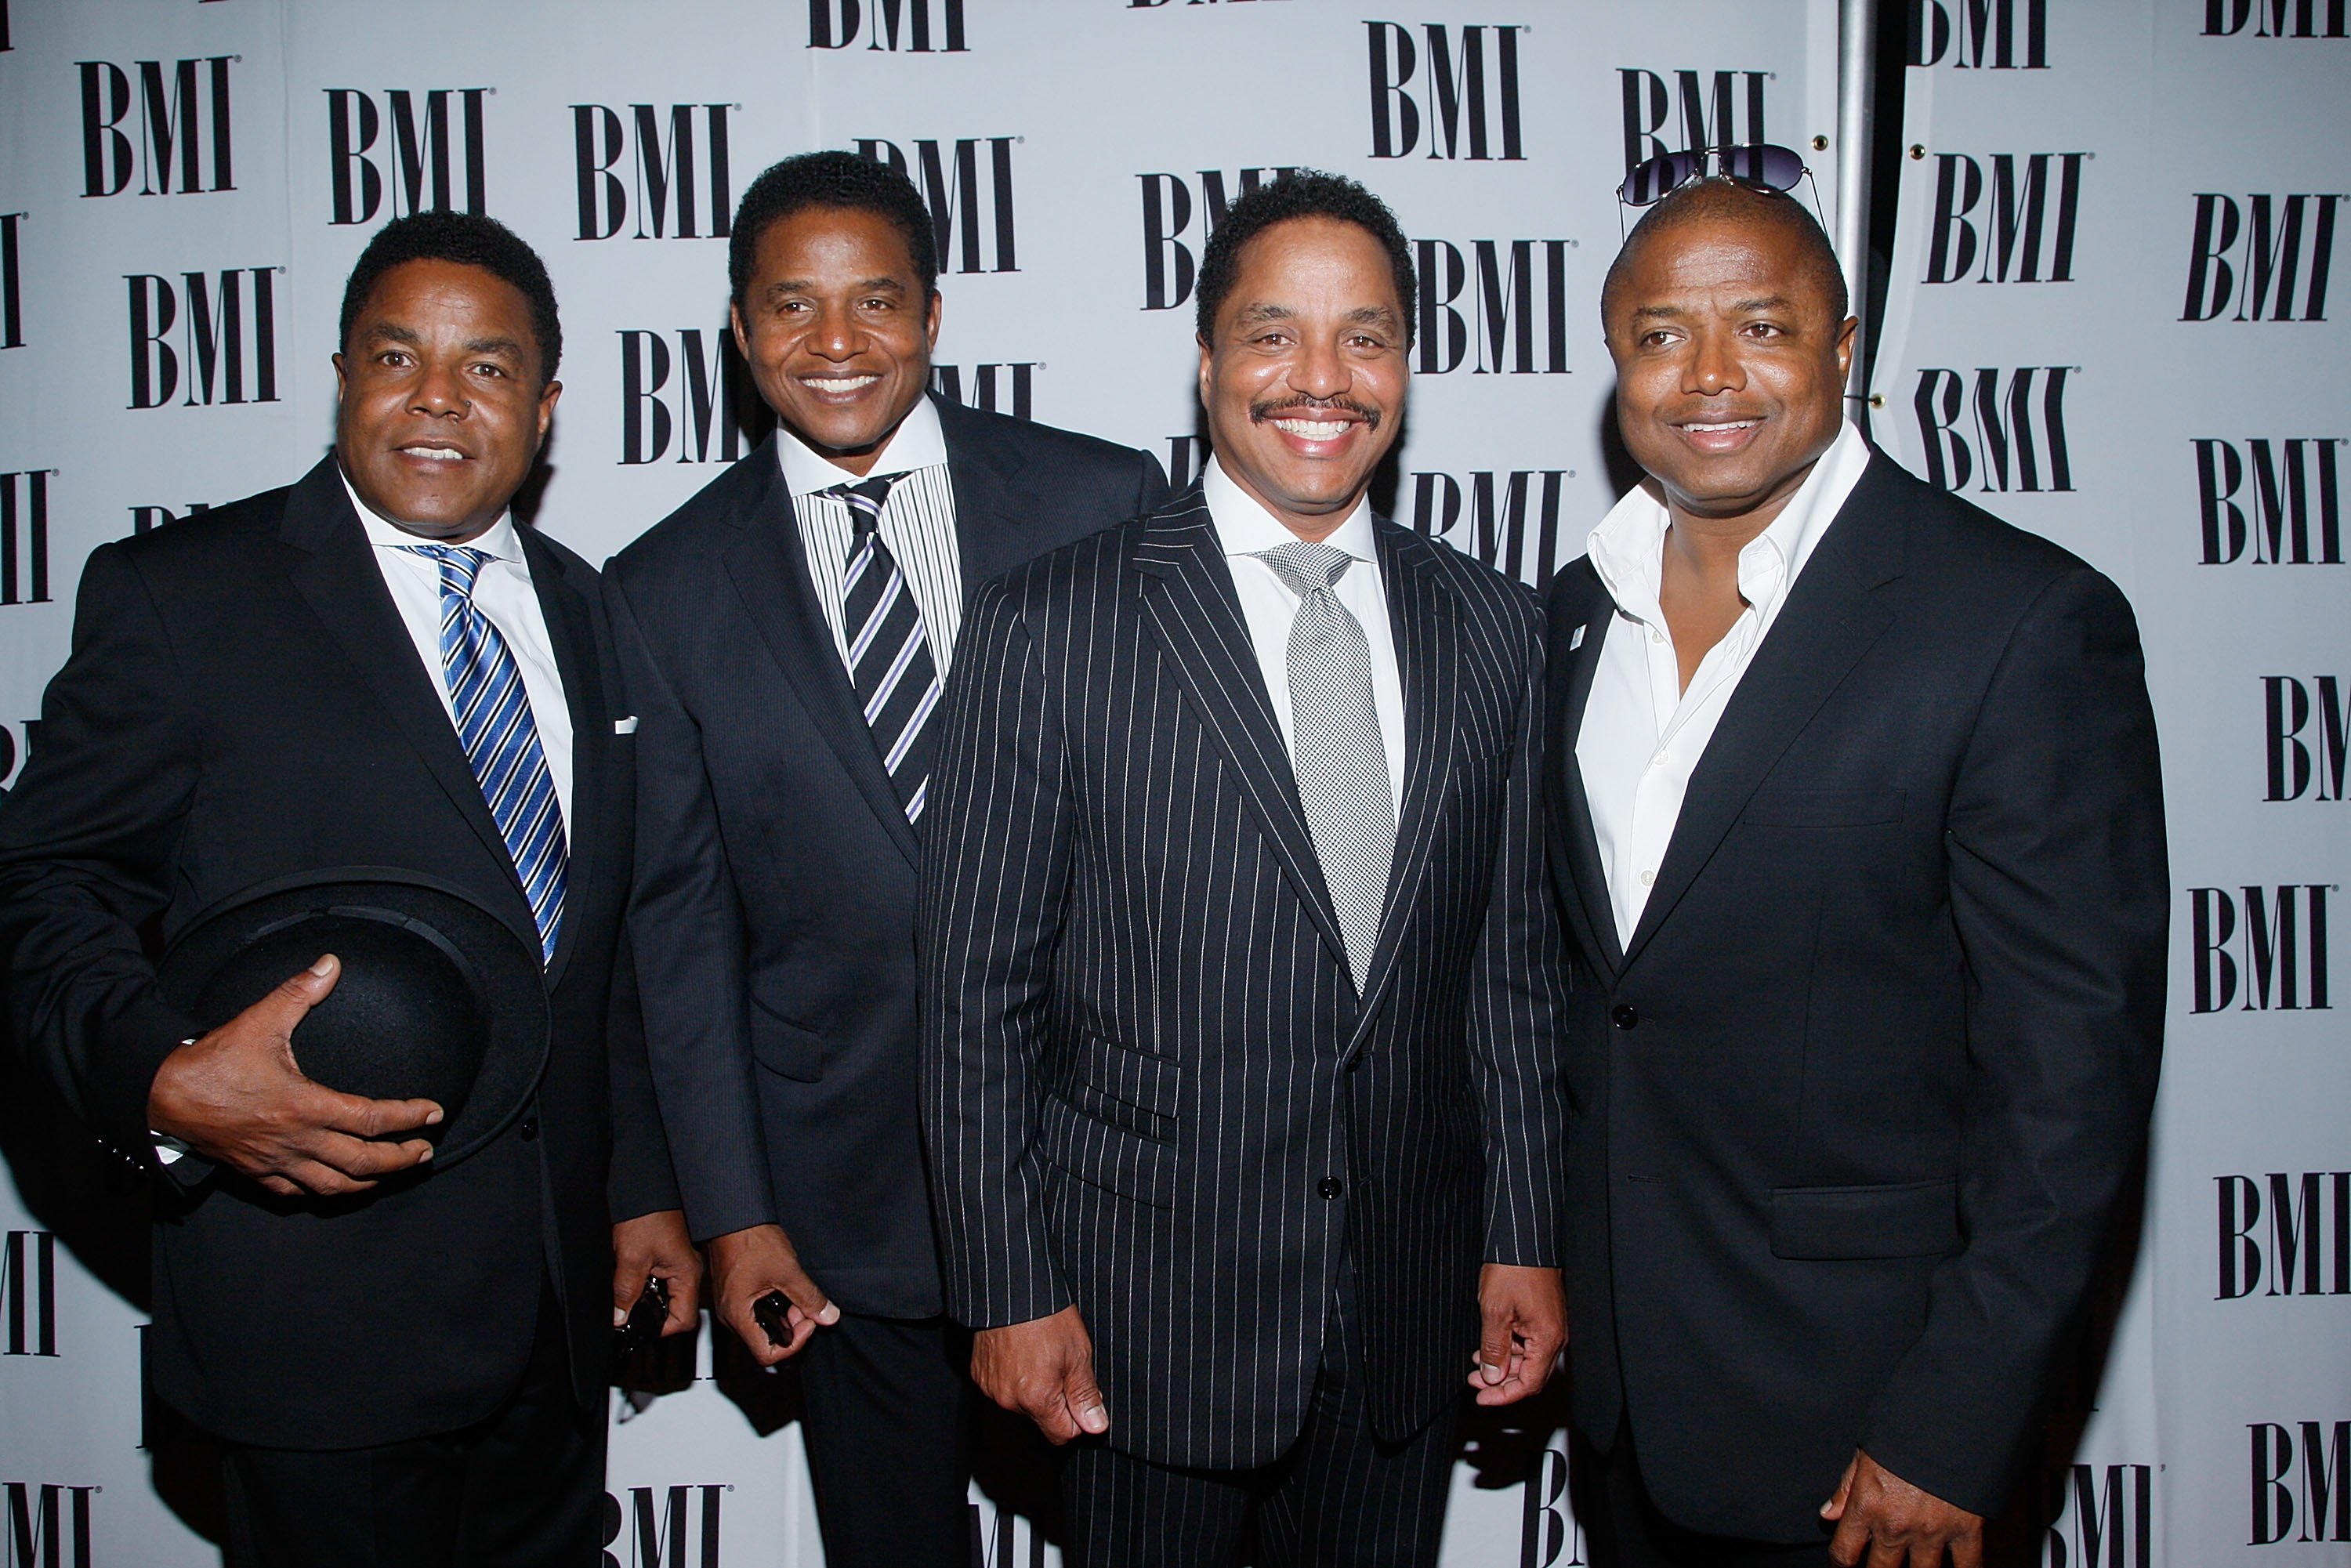 Brothers Tito, Jackie, Marlon and Randy Jackson arrive at the 8th Annual BMI Urban Awards at the Wishire Theatre on September 4, 2008, in Los Angeles, California. | Source: Getty Images.